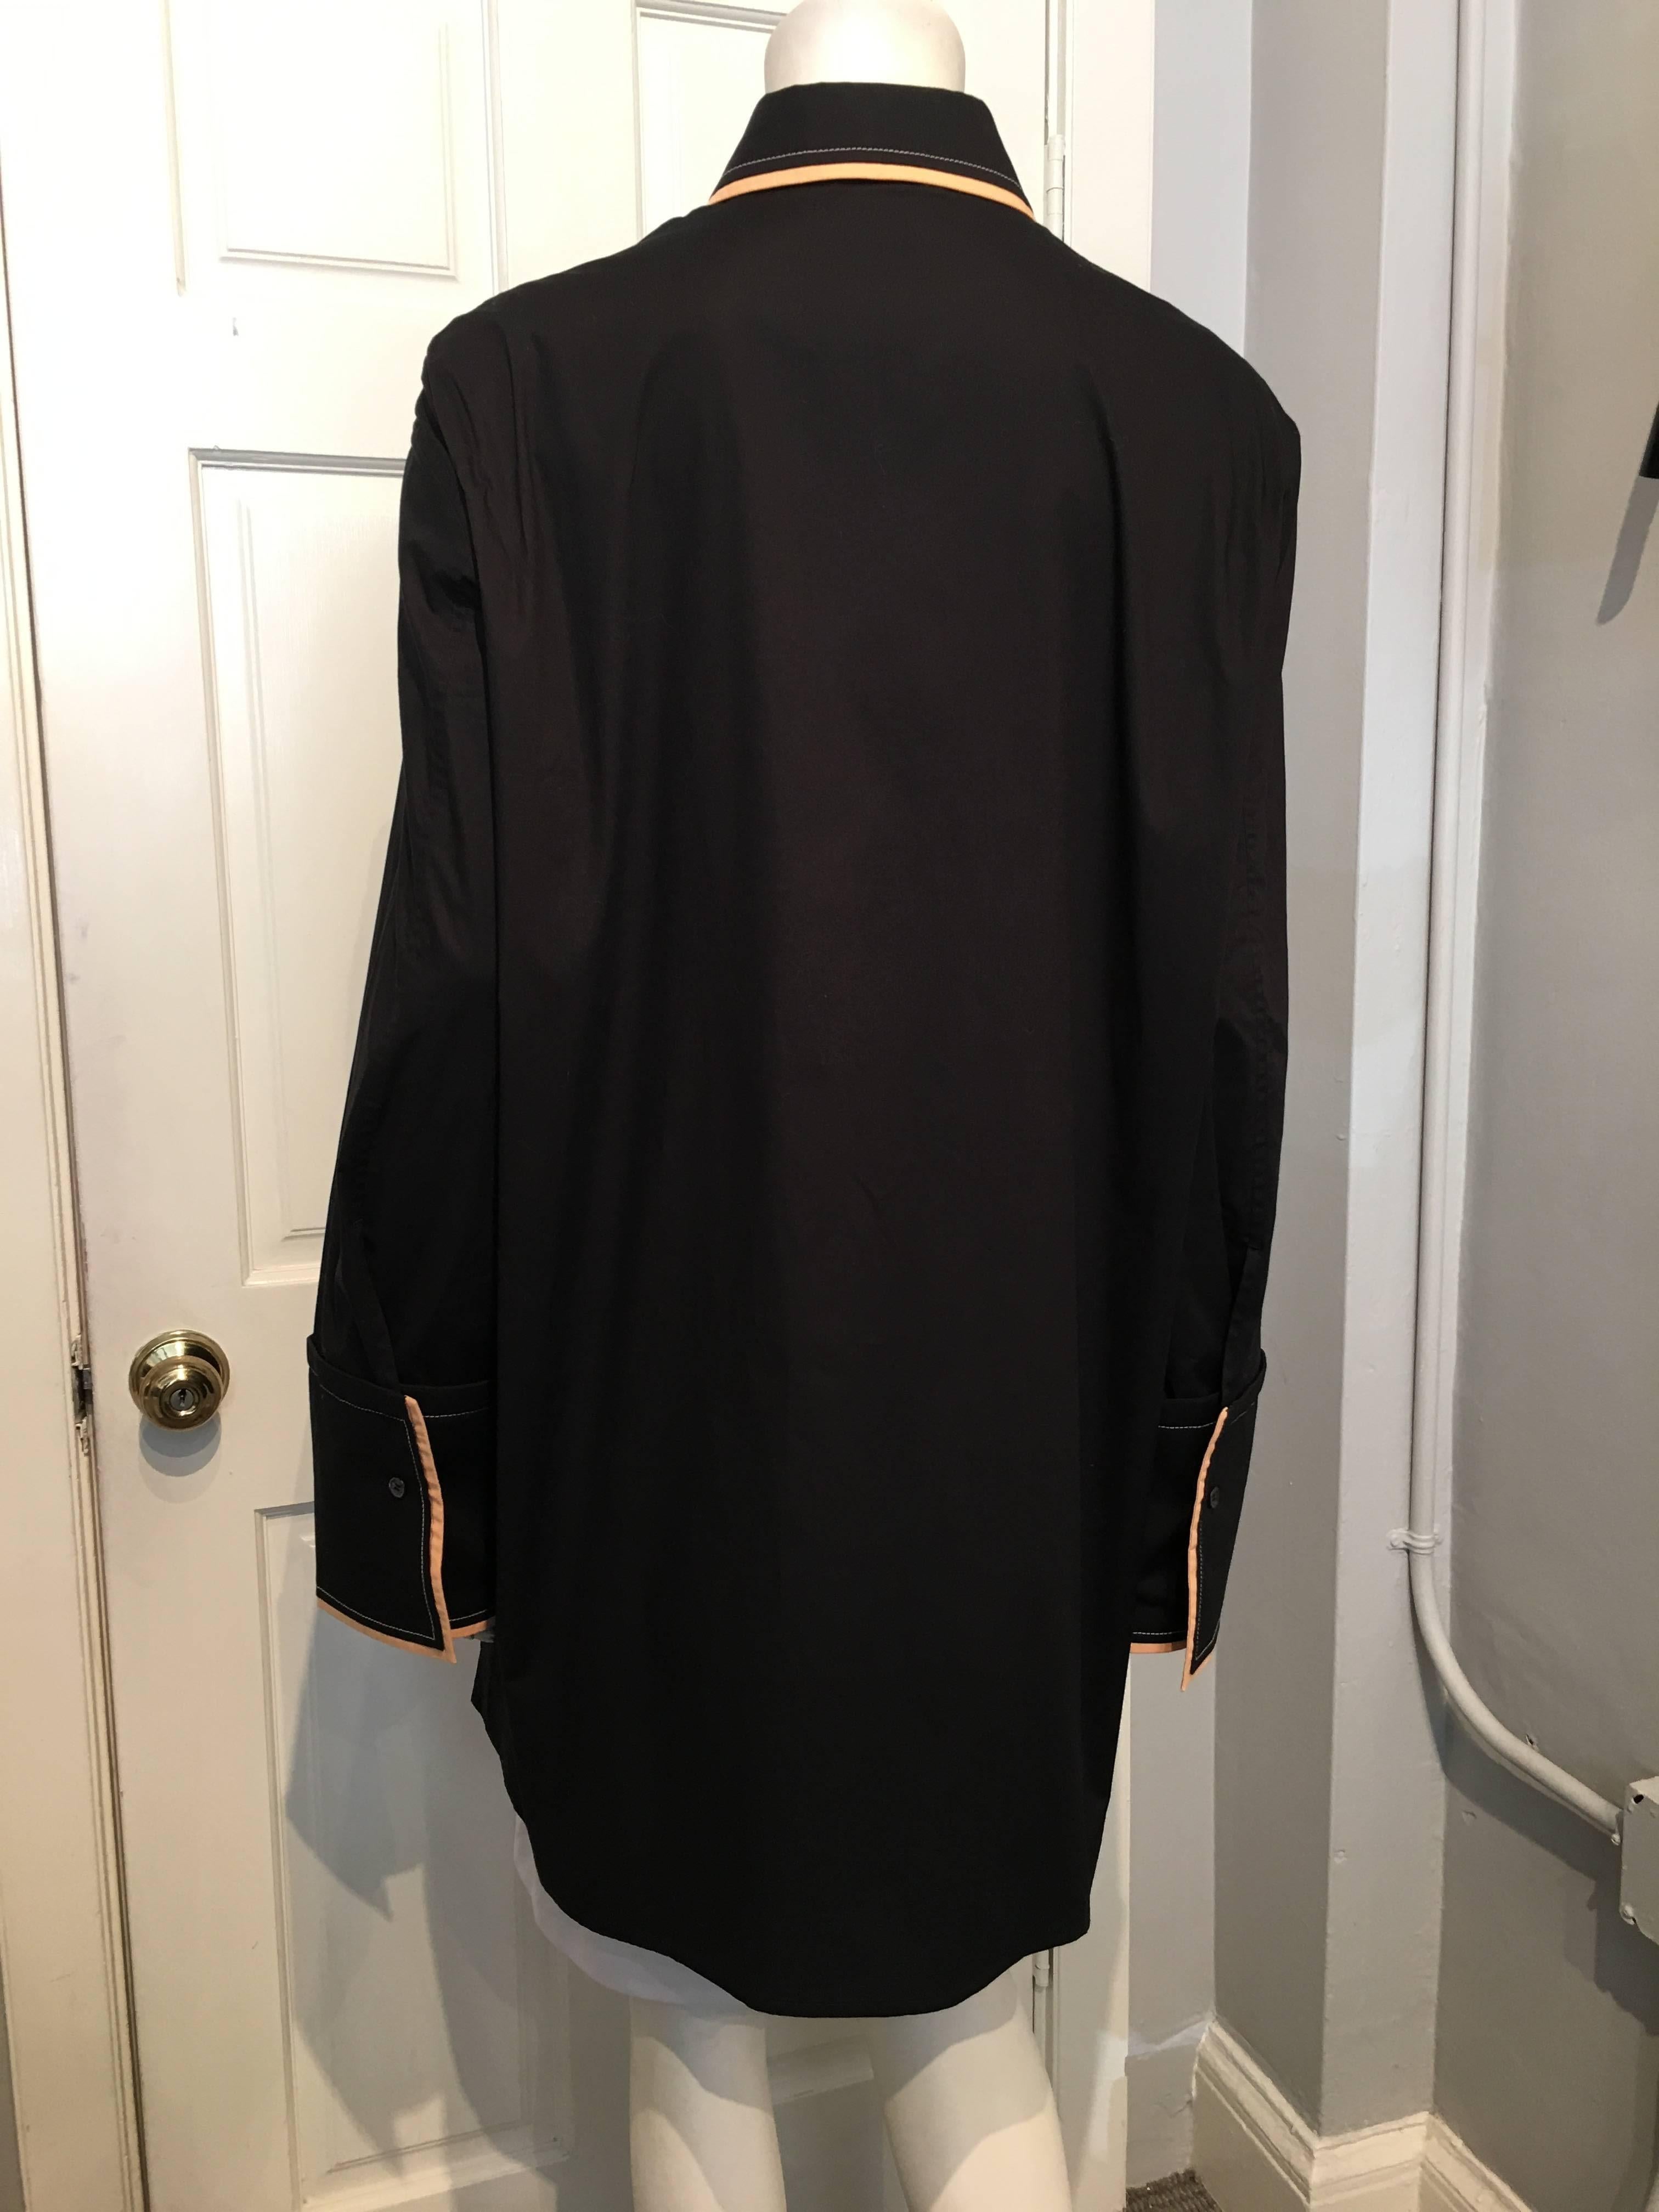 Celine Black Oversize Shirt Sz38 US 6, Fall 2016 In New Condition In San Francisco, CA